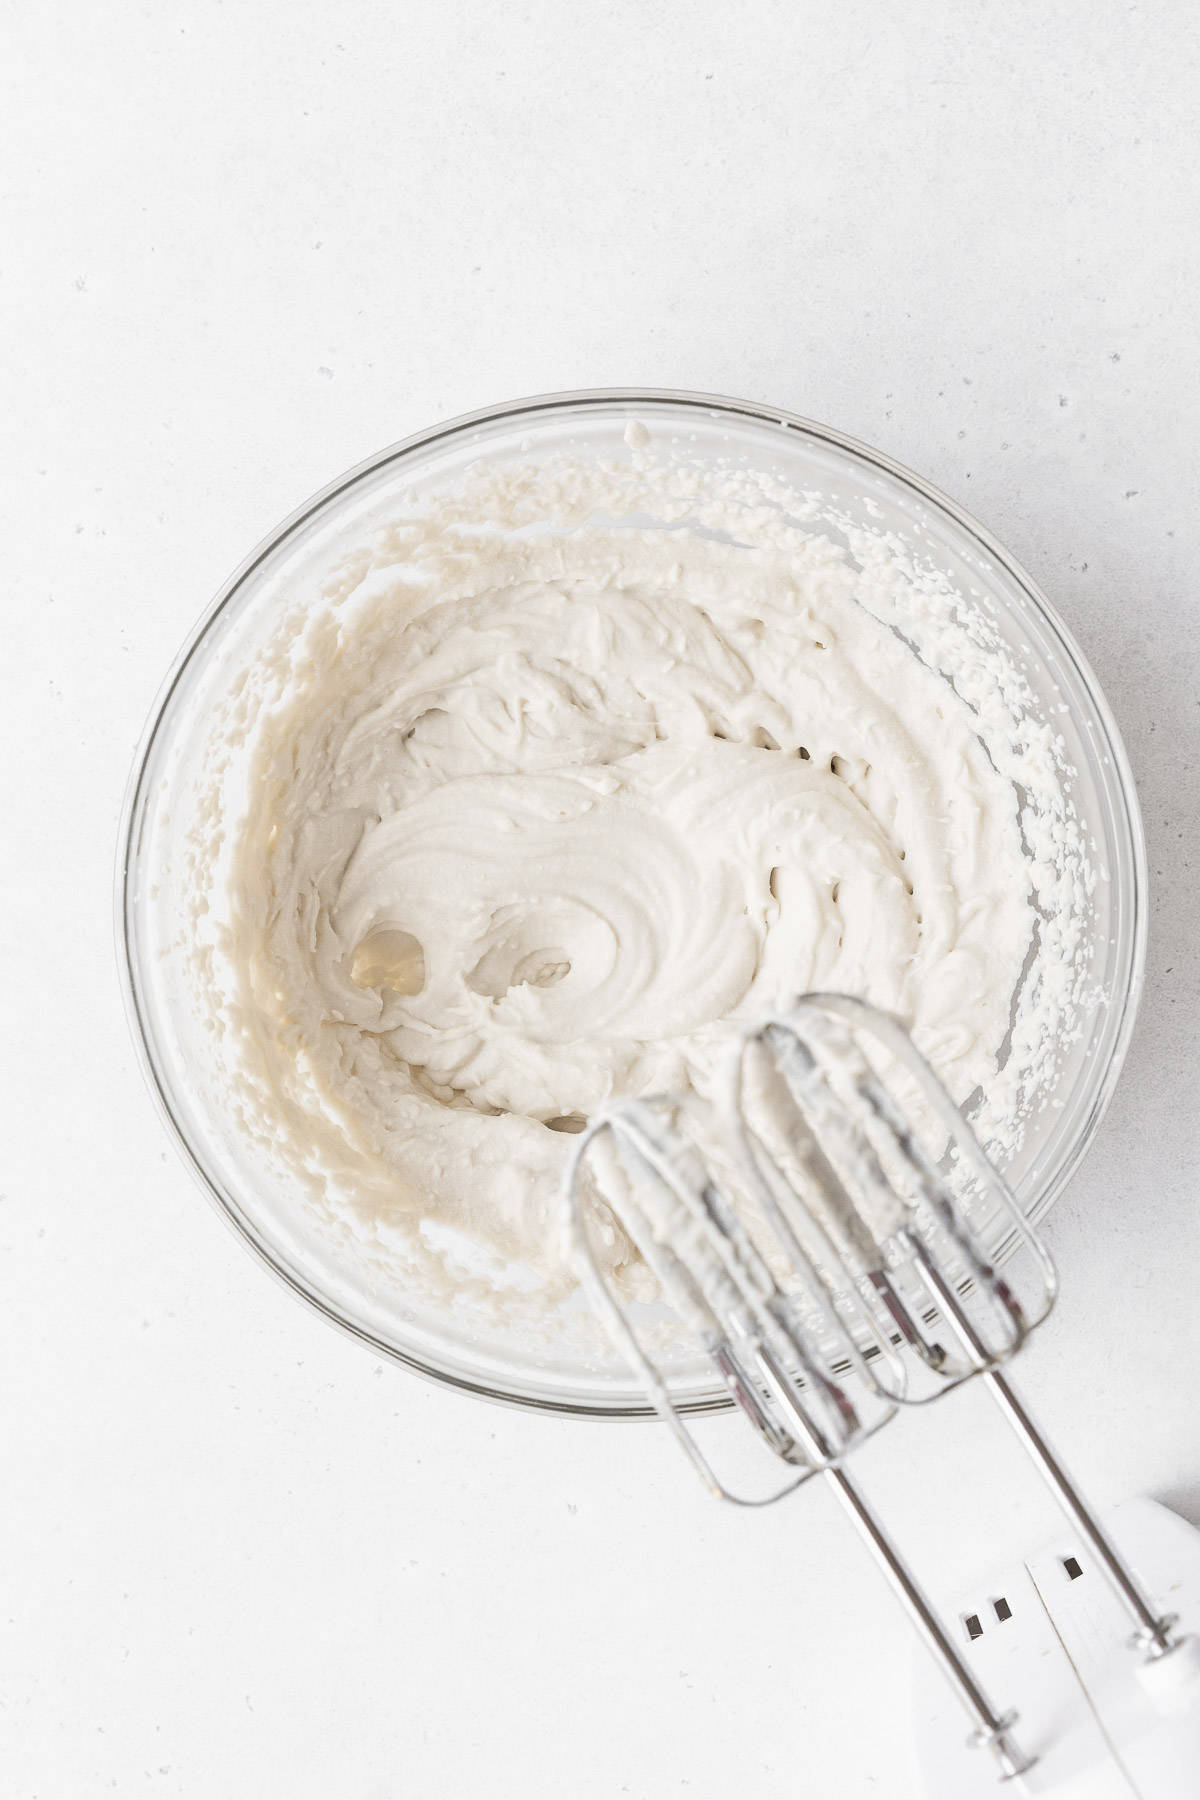 Whipping the non-dairy whipped cream in a glass mixing bowl.